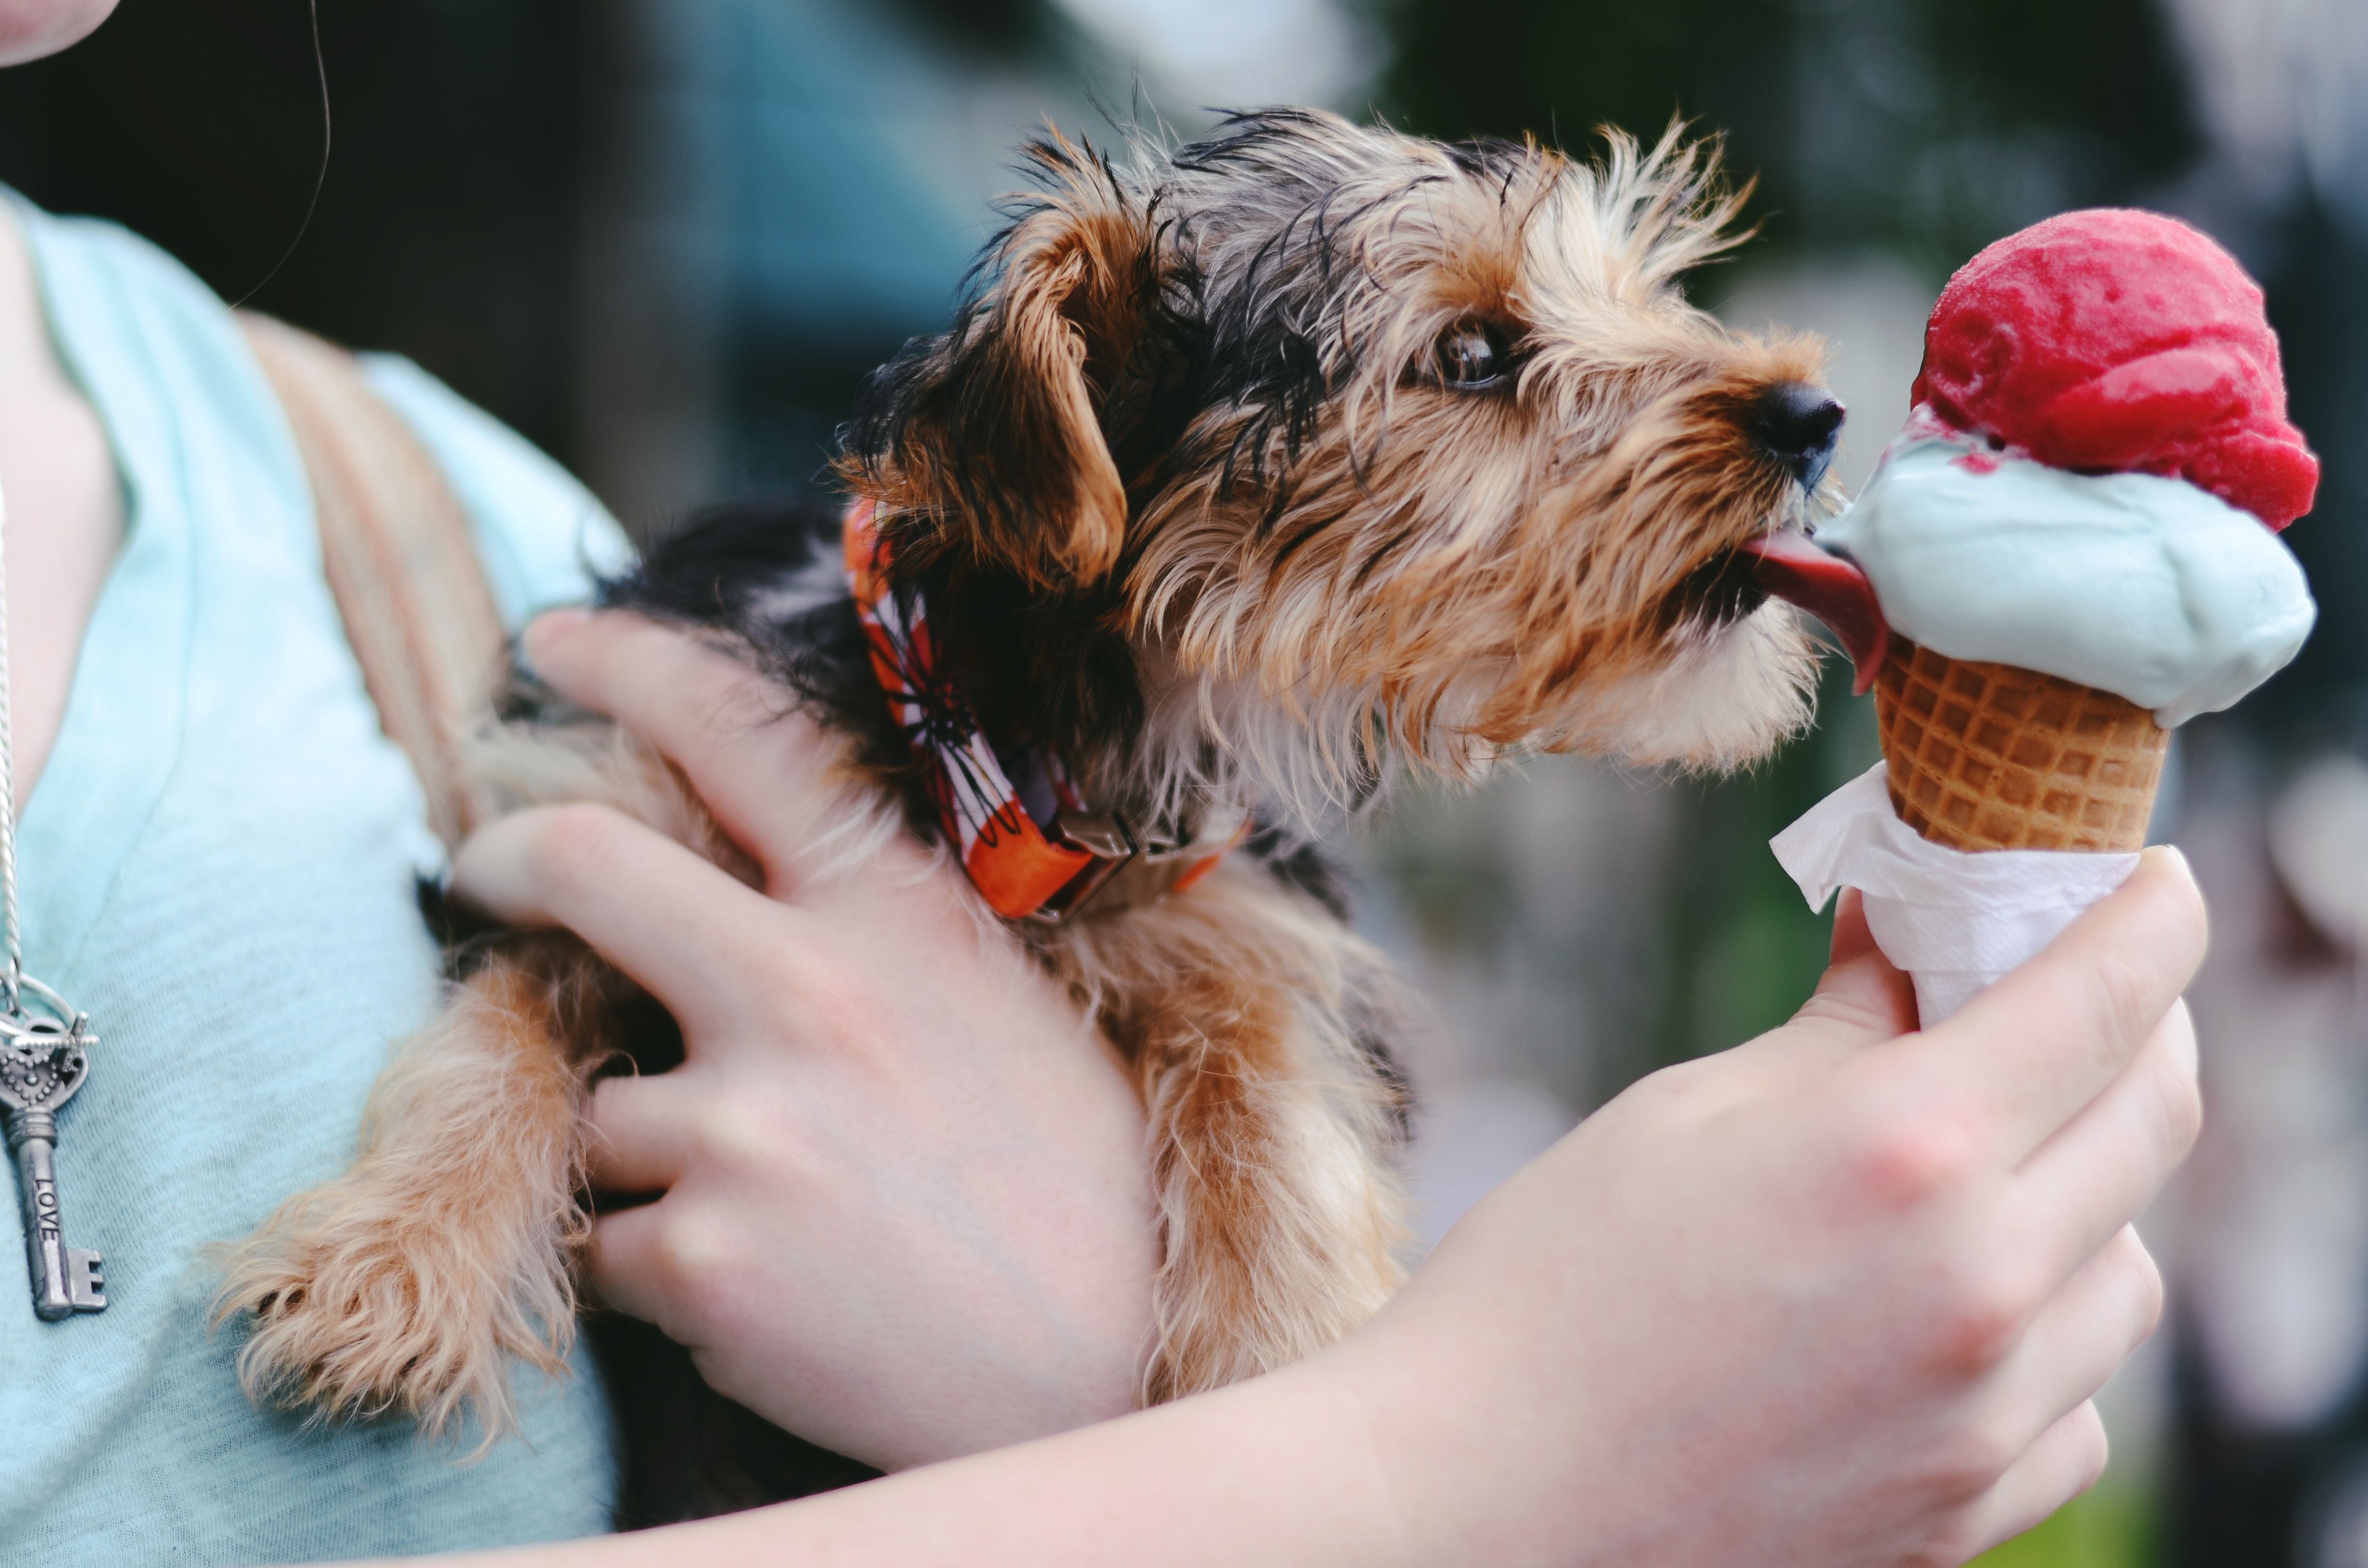 Dog "going for" owners ice cream cone